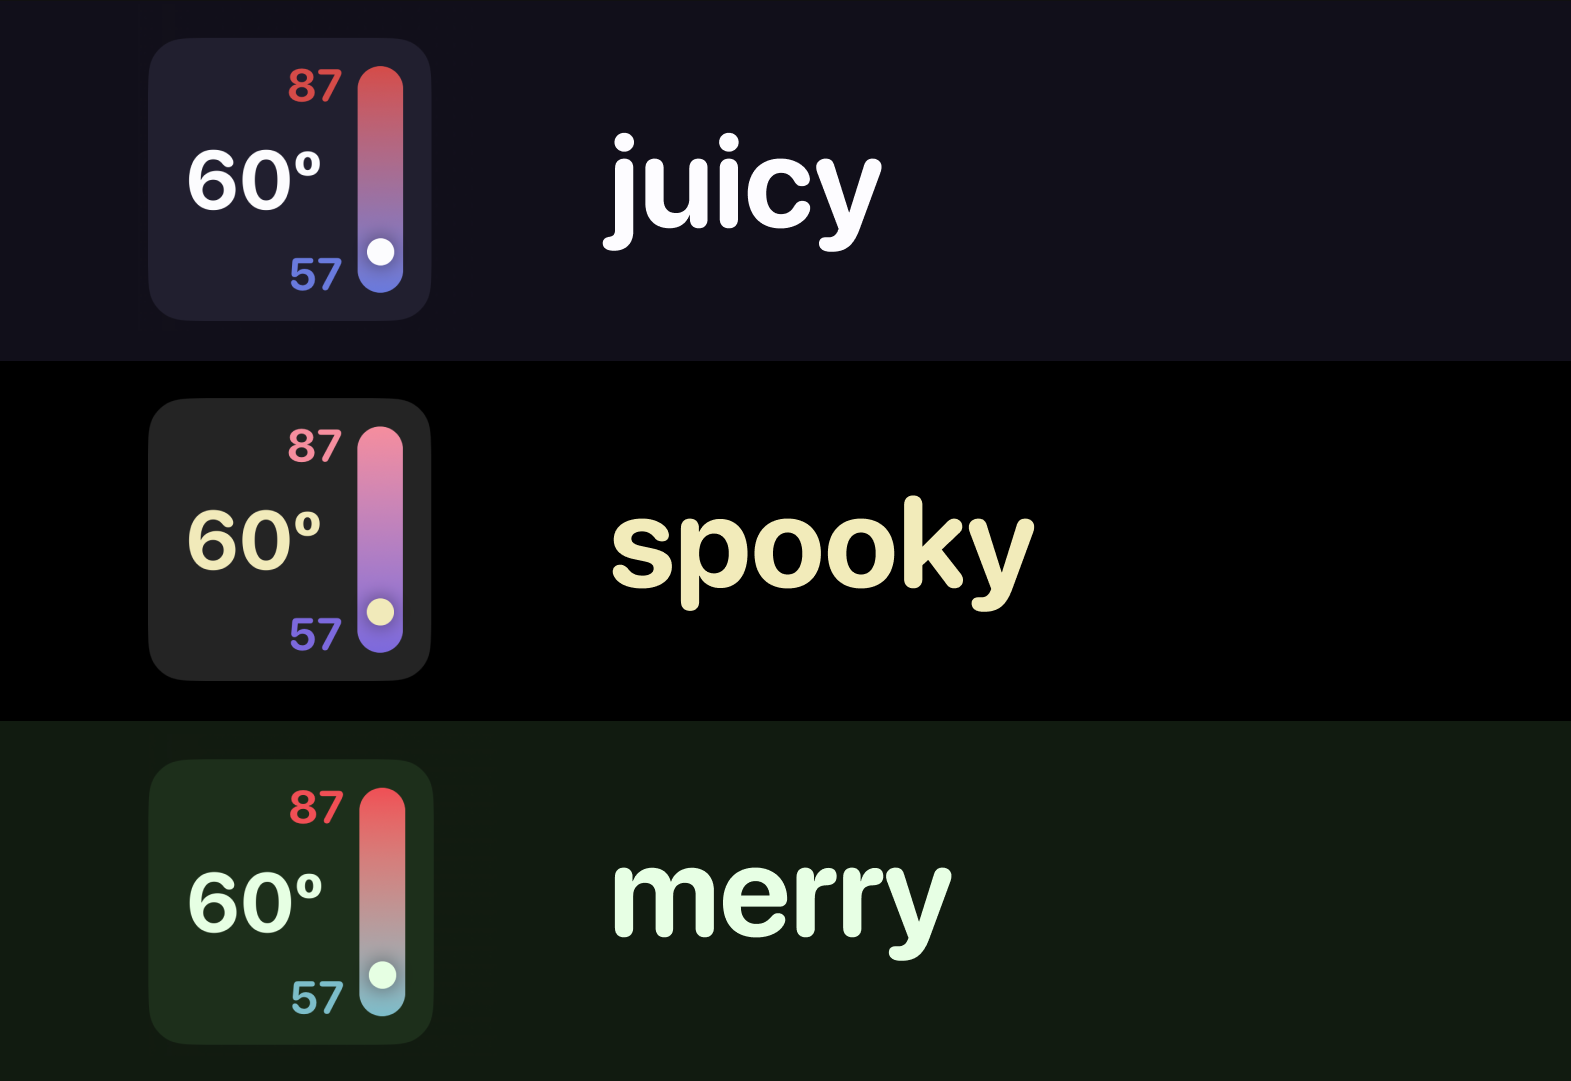 Widgets in each theme: juicy, spooky, and merry